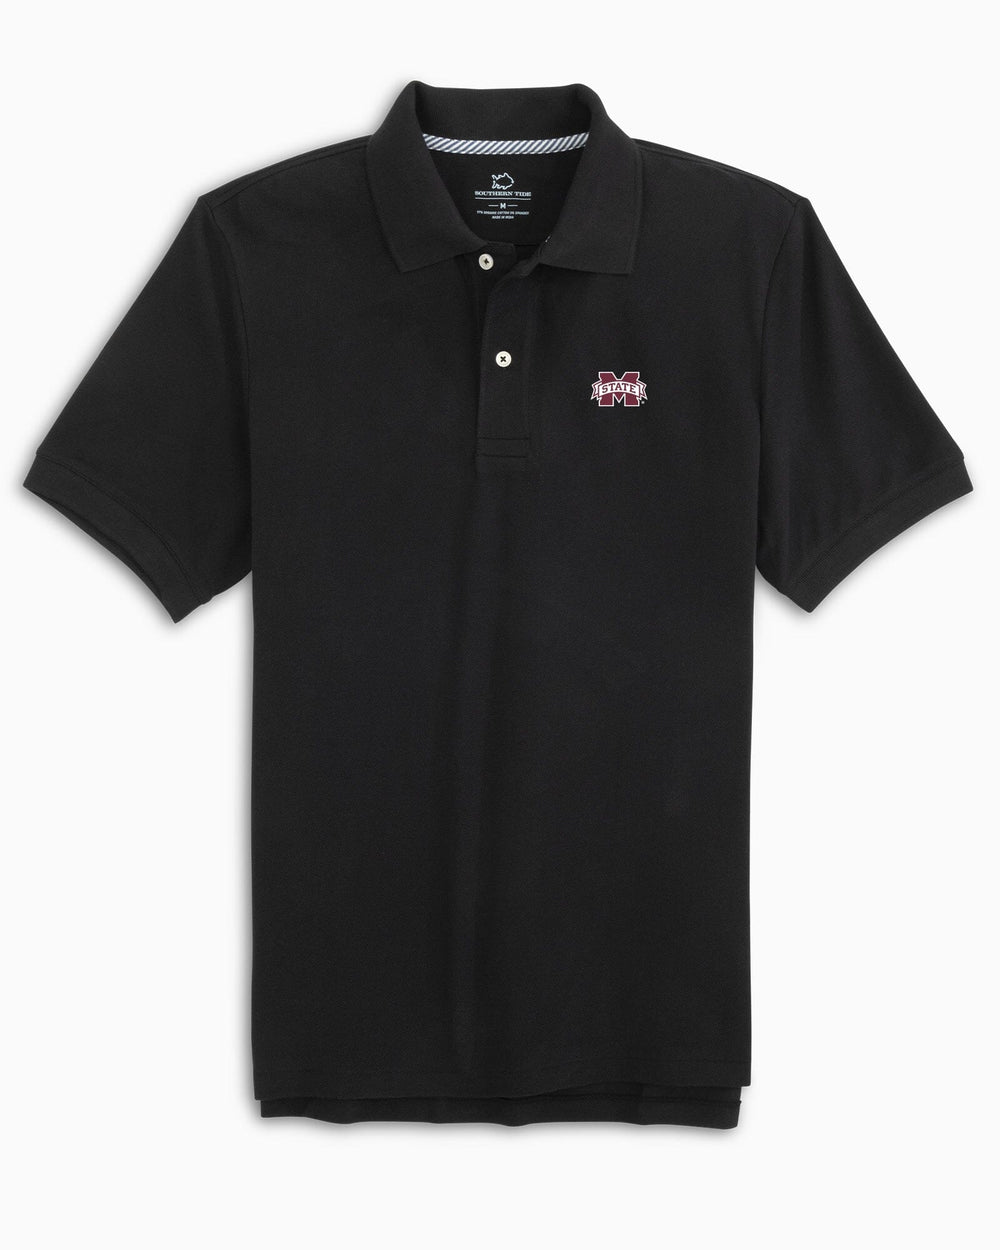 The front view of the Mississippi State Bulldogs Skipjack Polo by Southern Tide - Black